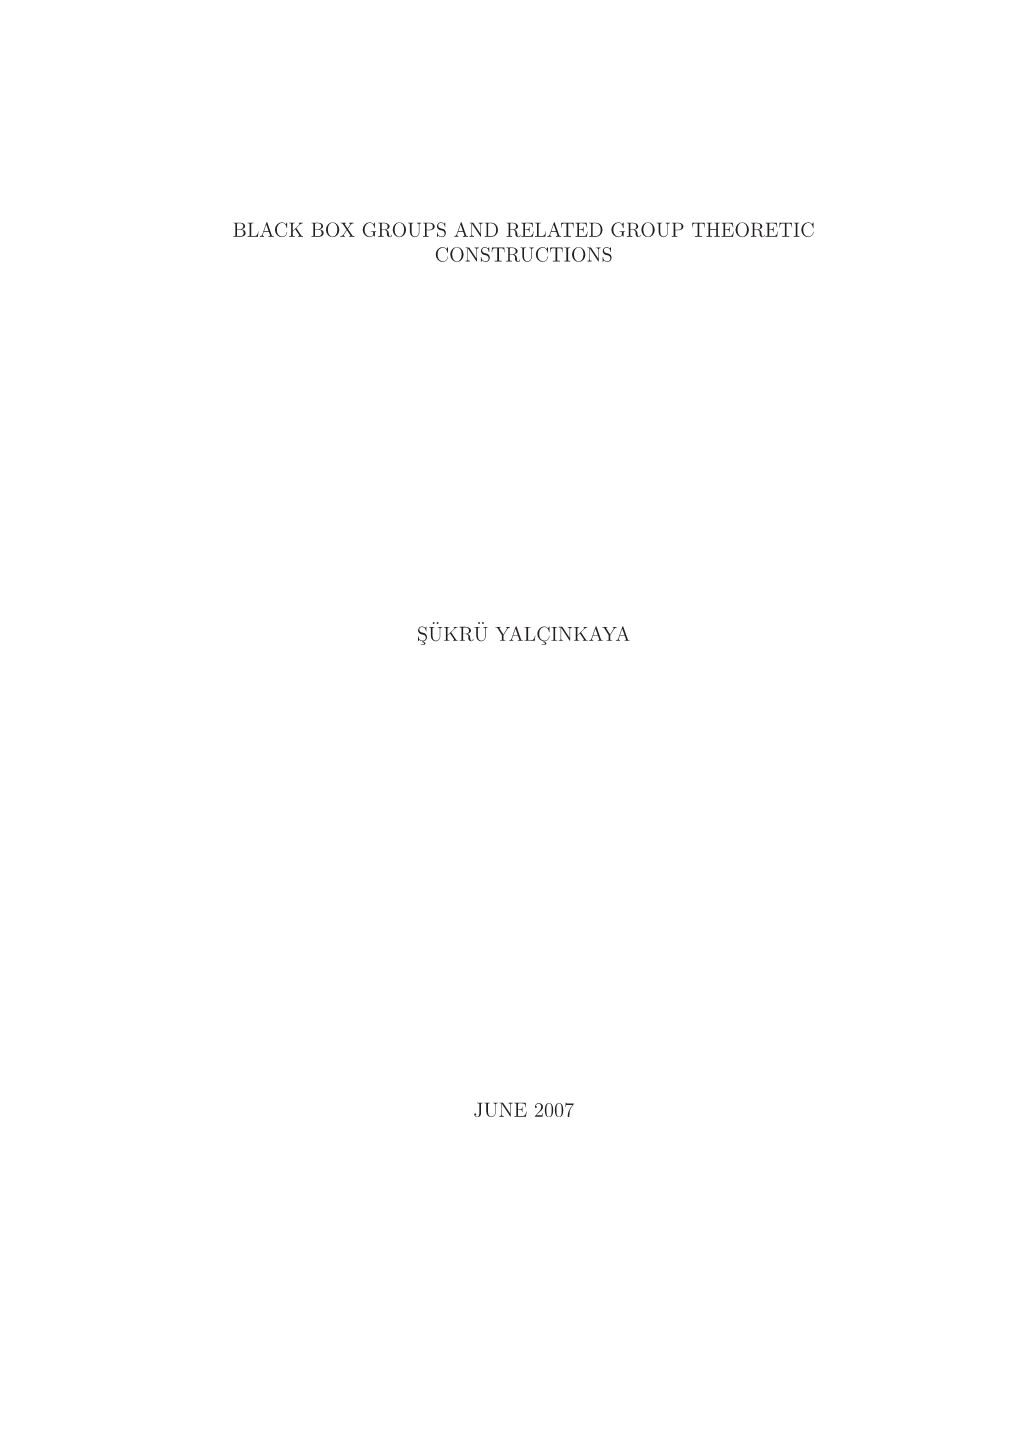 Black Box Groups and Related Group Theoretic Constructions